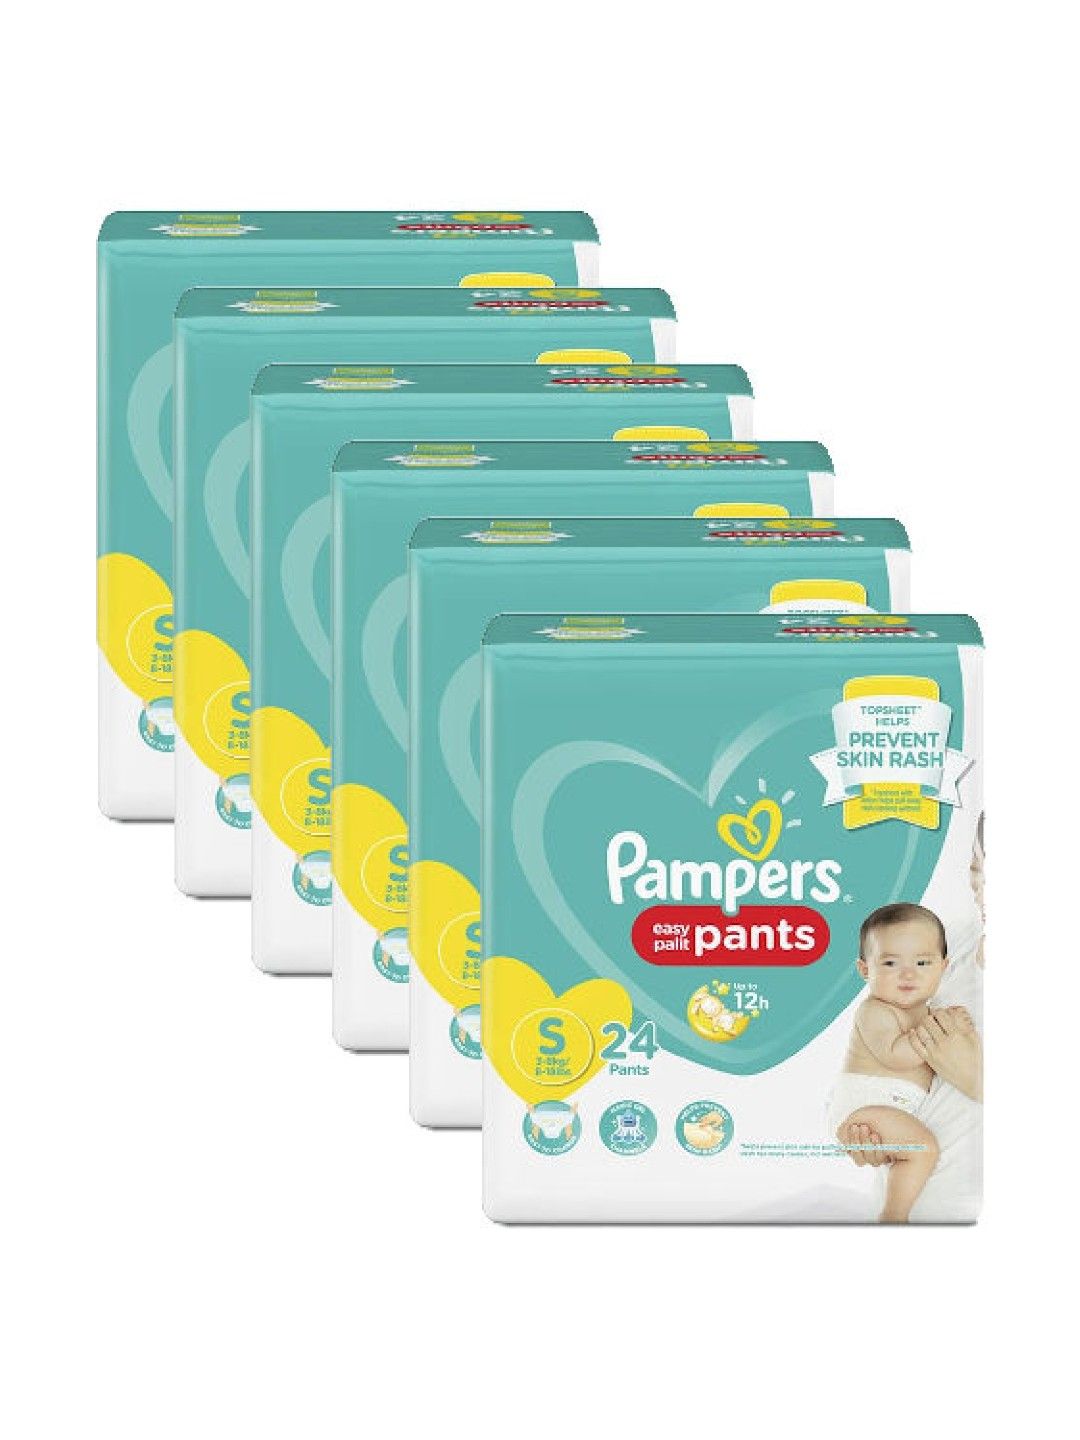 Buy Pampers All round Protection Pants, Small size baby diapers (SM), 36  Count, Anti Rash diapers, Lotion with Aloe Vera Online at Low Prices in  India - Amazon.in